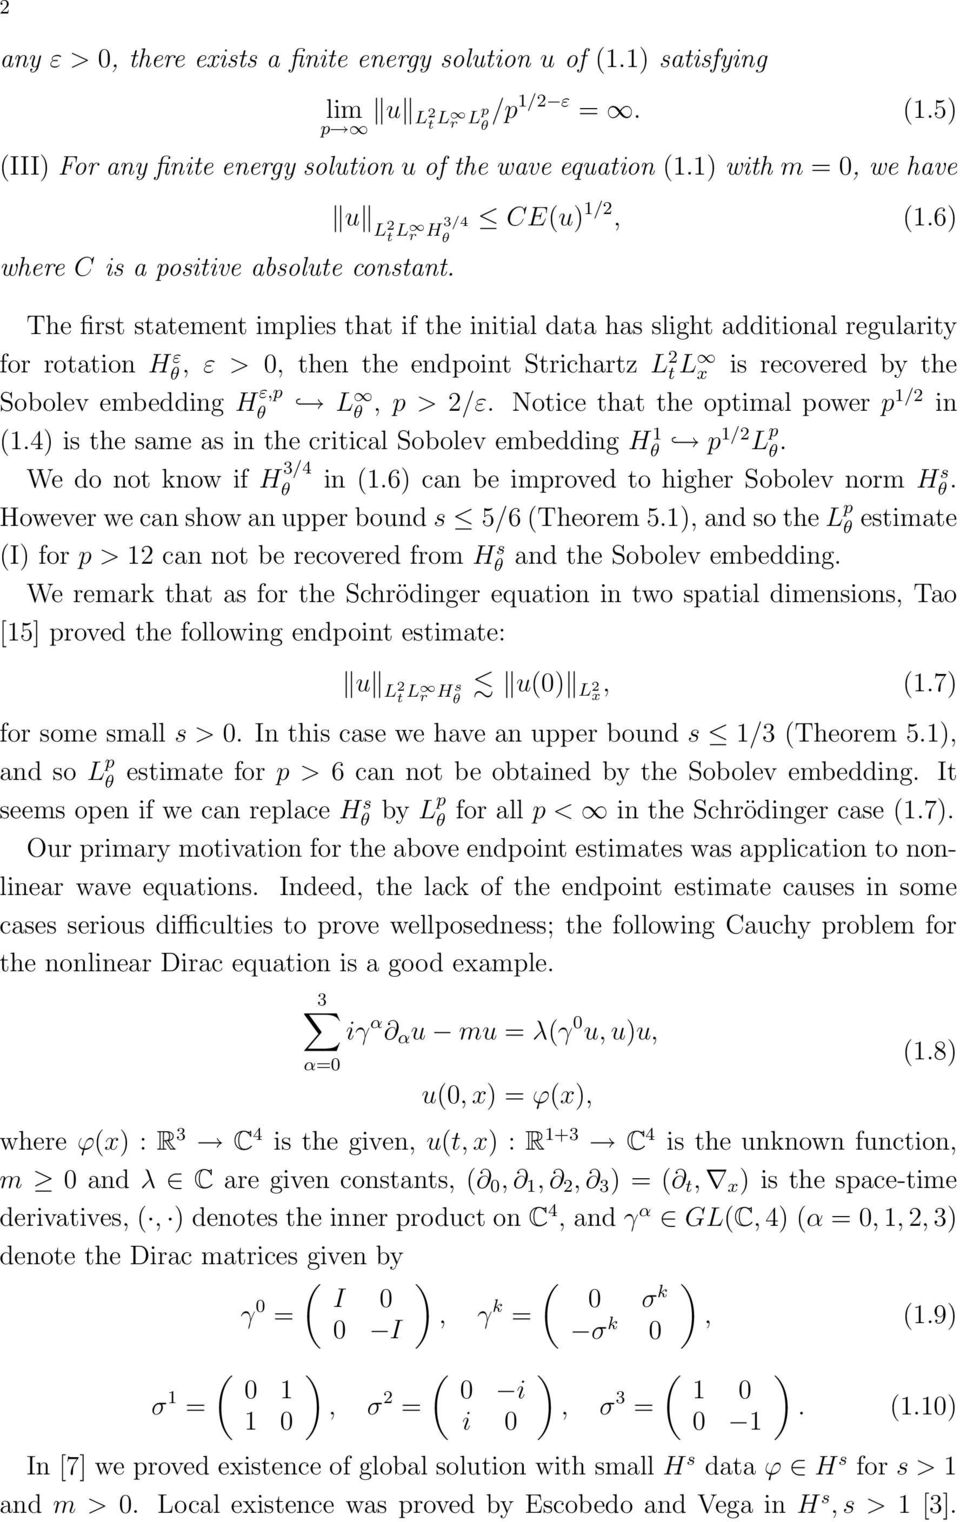 6) The firs saemen implies ha if he iniial daa has sligh addiional regulariy for roaion H ε, ε >, hen he endpoin Sricharz L2 L x is recovered by he Sobolev embedding H ε,p L, p > 2/ε.